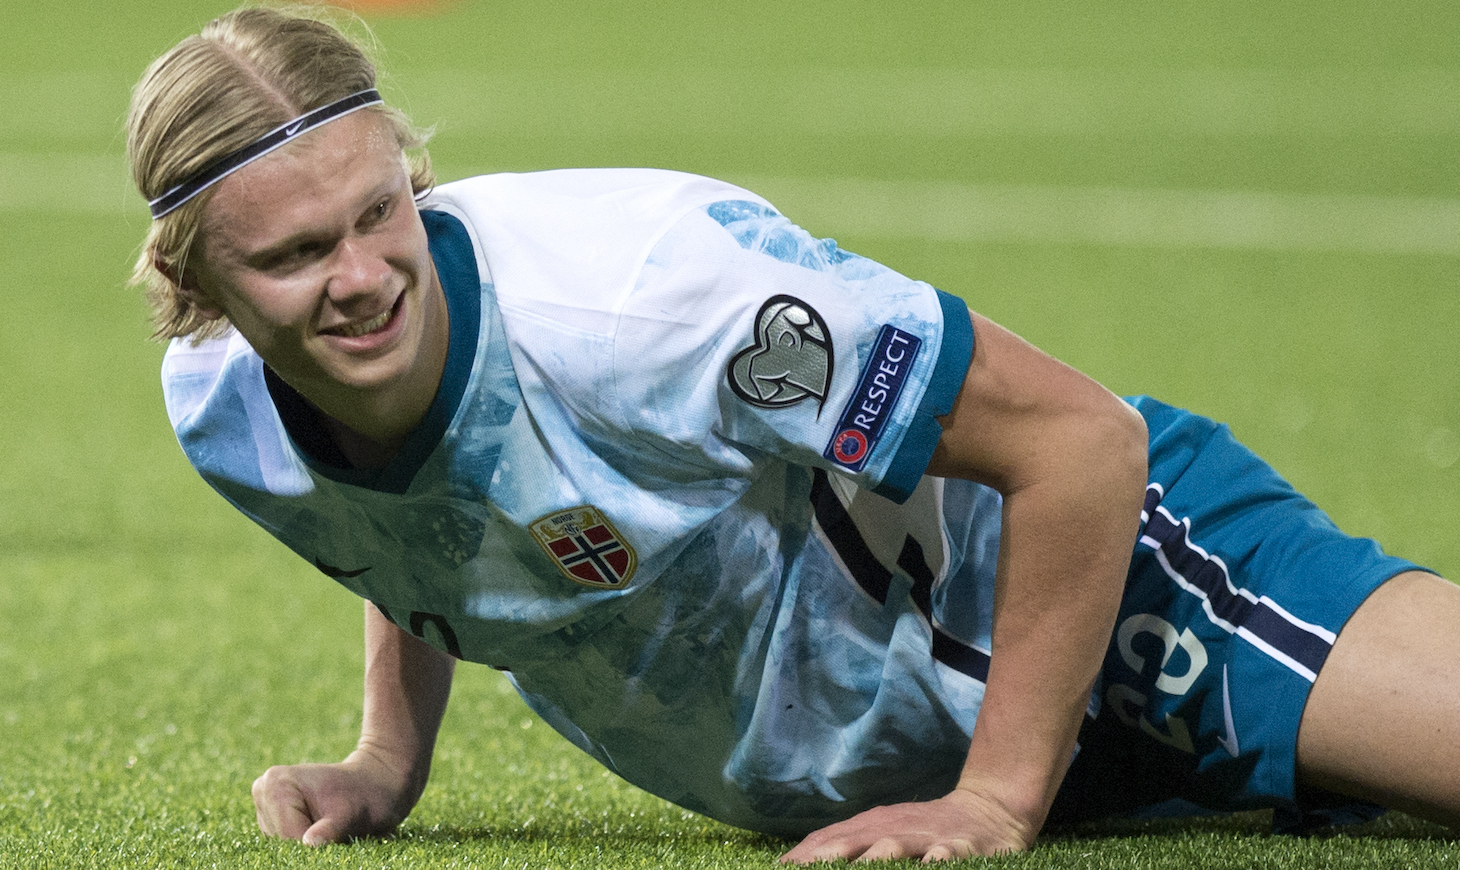 Norway's forward Erling Braut Haaland lays on the field during the FIFA World Cup Qatar 2022 qualification football match between Gibraltar and Norway on March 24, 2021 at the Victoria Stadium in Gibraltar.